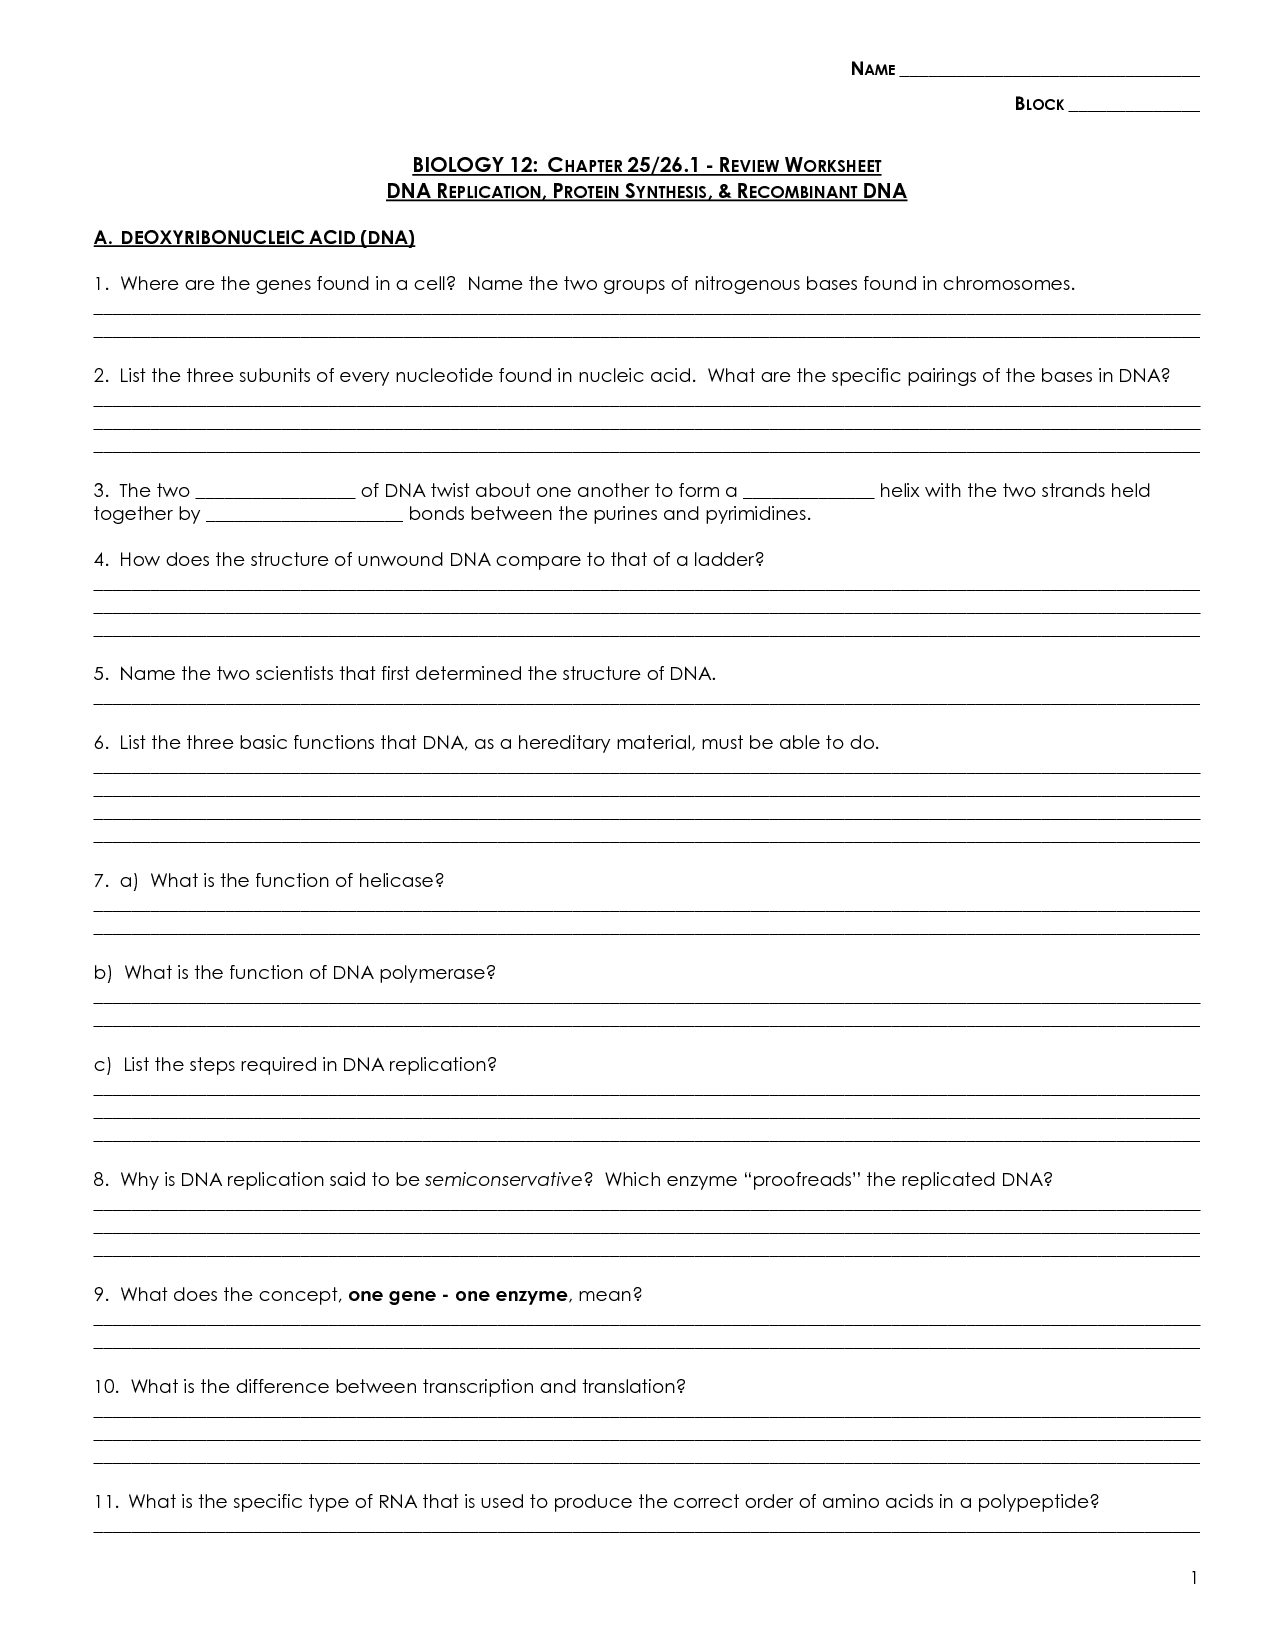 13-best-images-of-12-2-the-structure-of-dna-worksheet-answers-dna-structure-worksheet-answers